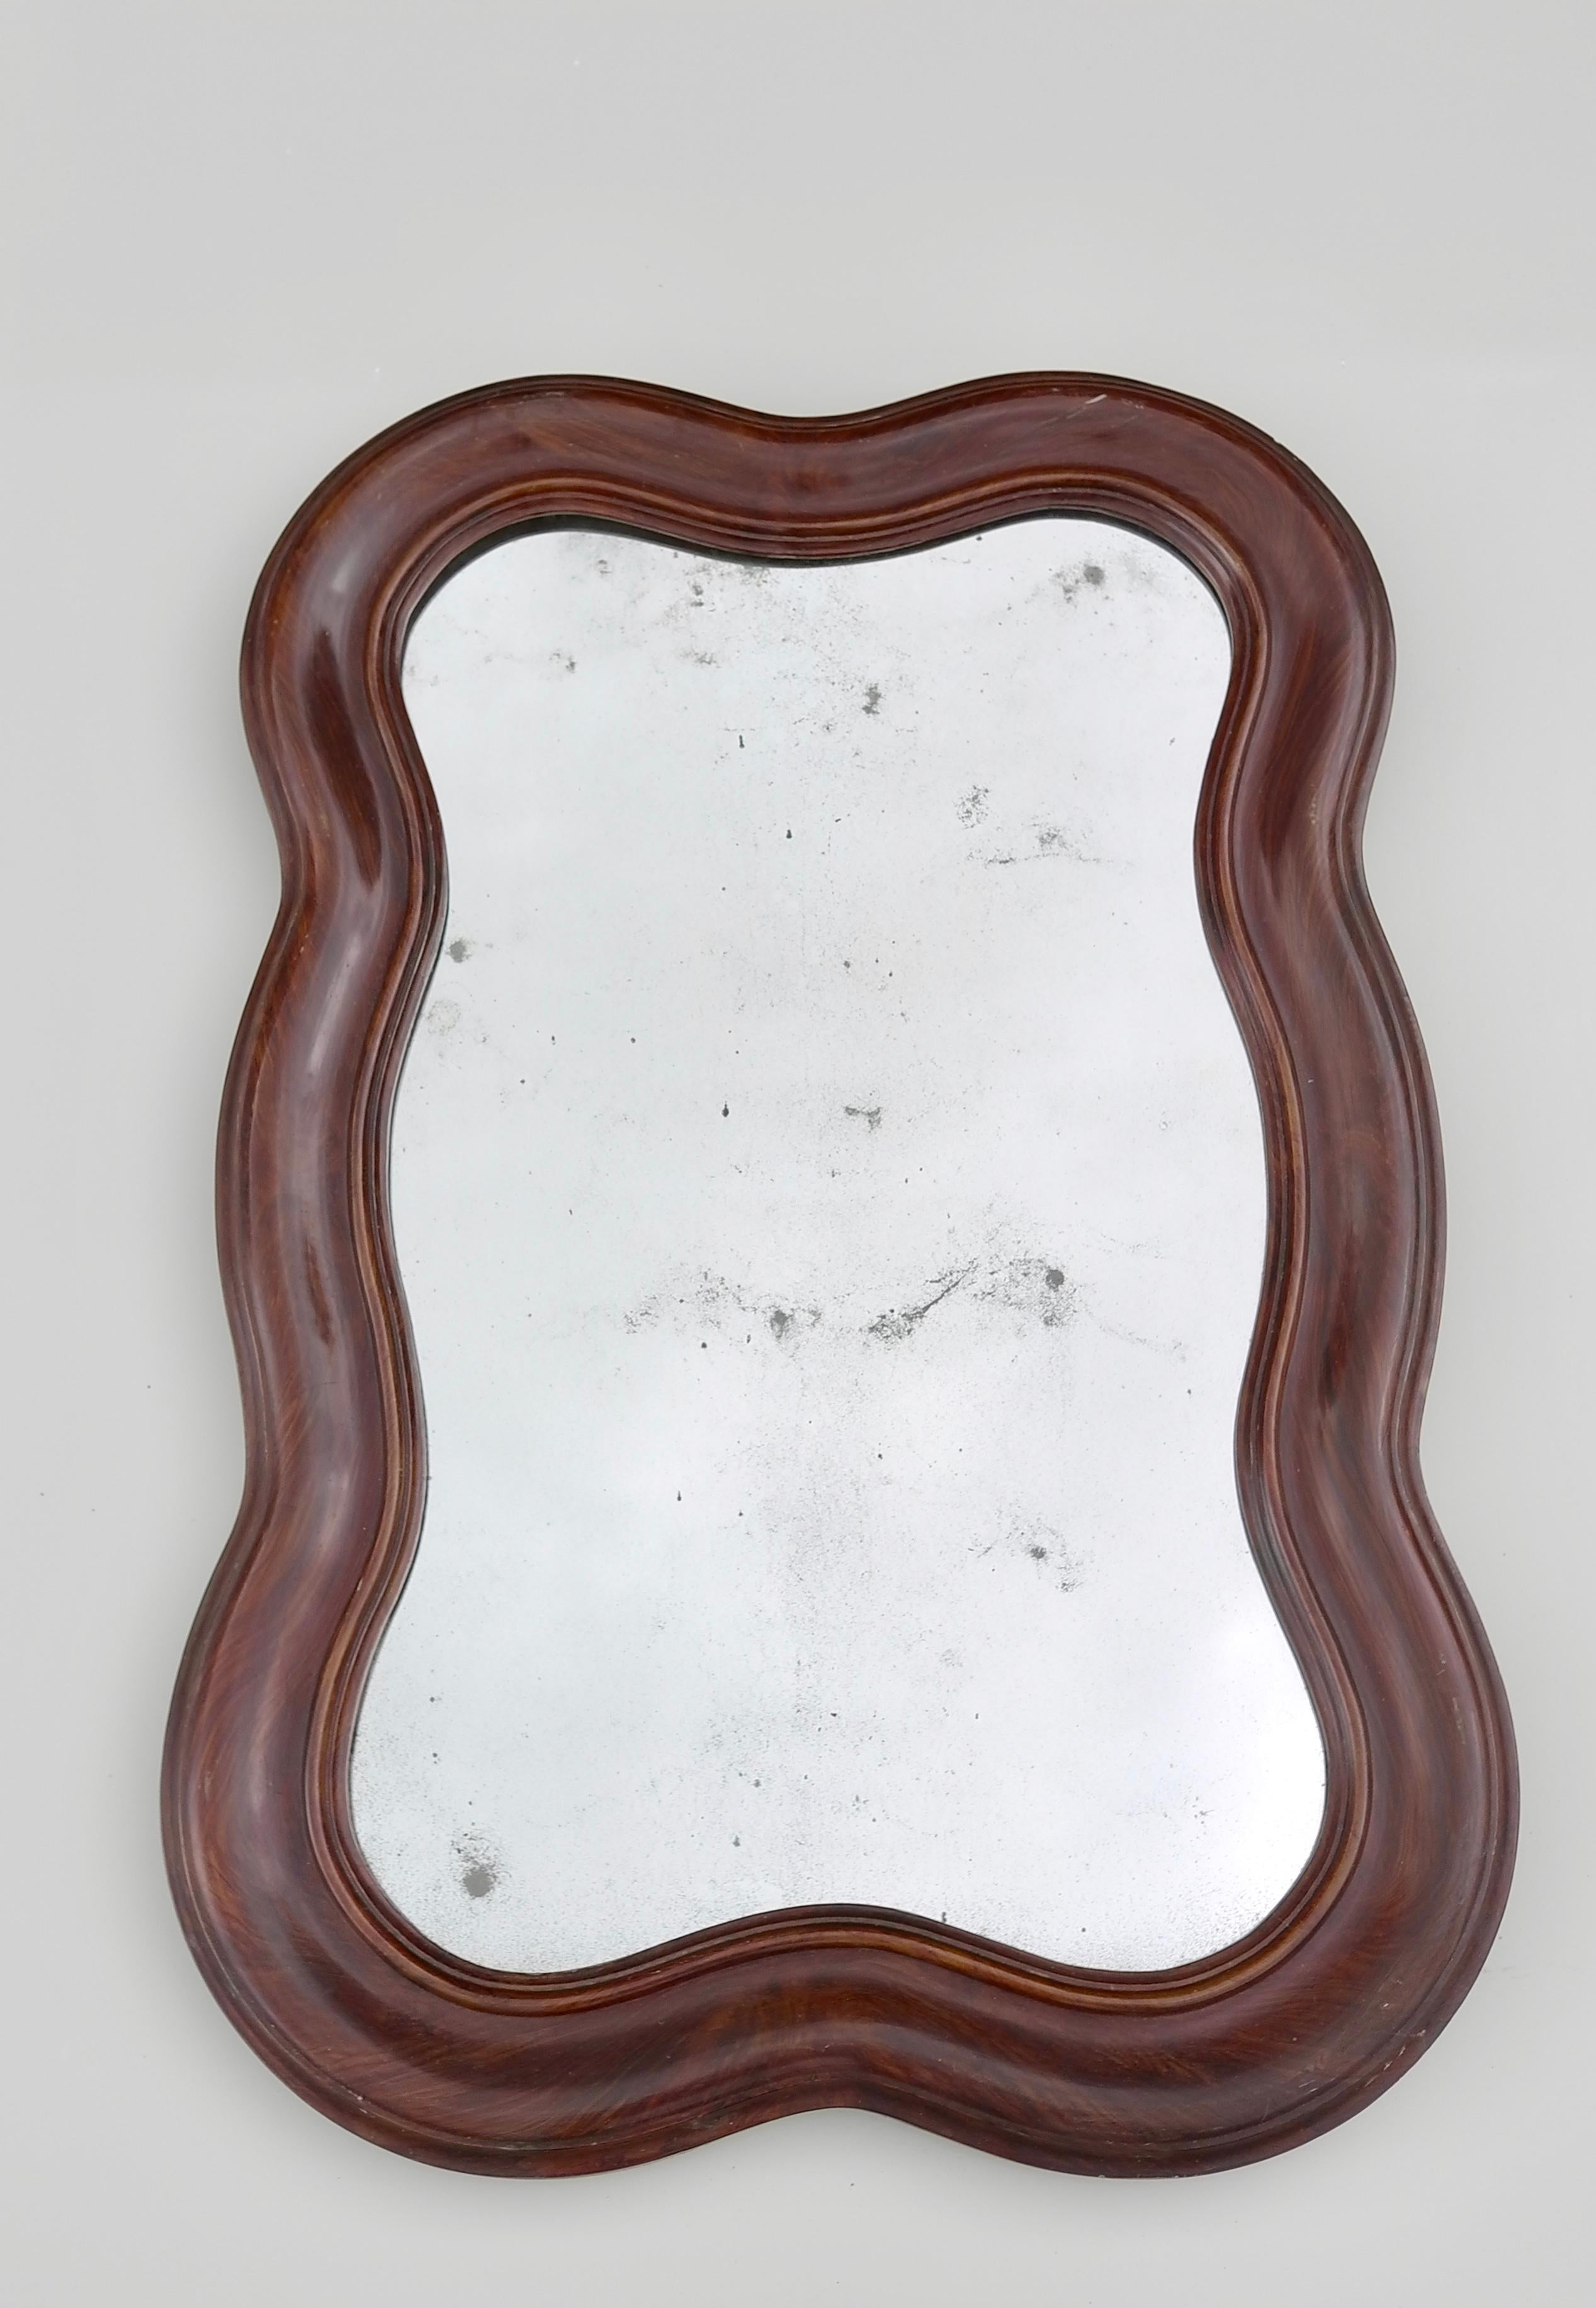 Large curved oak wall hanging mirror with distressed glass, Italy 1940's


It has the original glass that got 